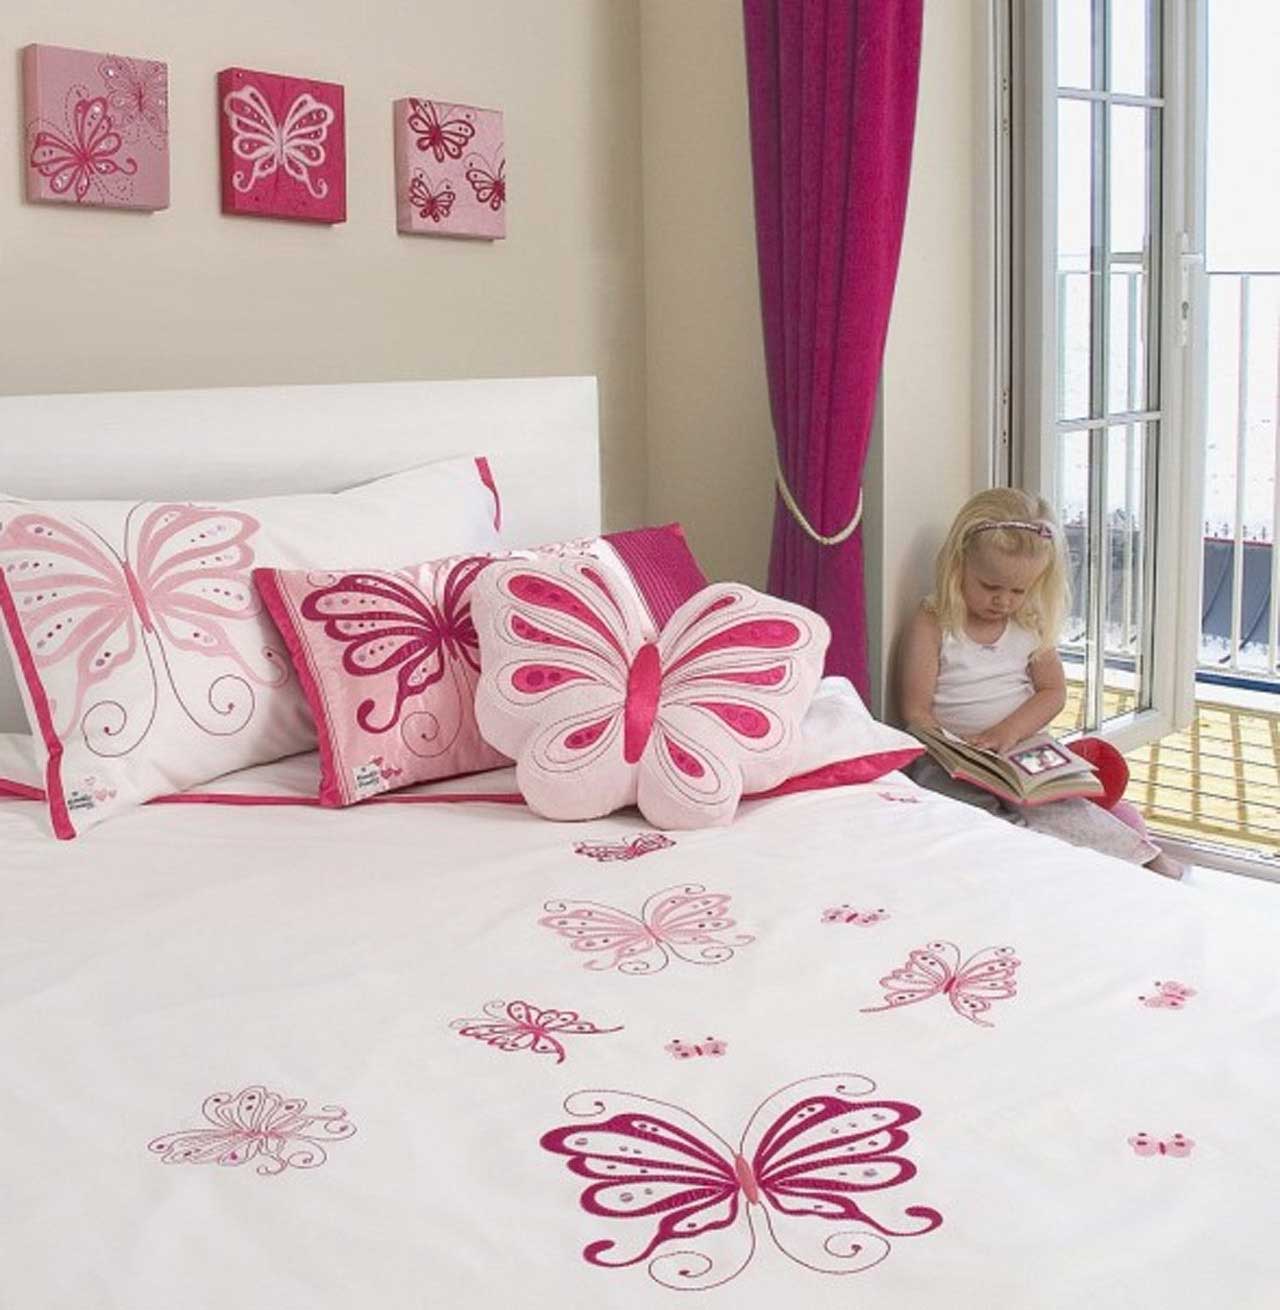 Kids Room Girl Charming Kids Room Decor For Girl With Beautiful Spring Butterfly Bed Kids Room Ideas Also Interesting Accessories For Teenage Girl Room Kids Room Design Decoration Kids Desire And Kids Room Decor